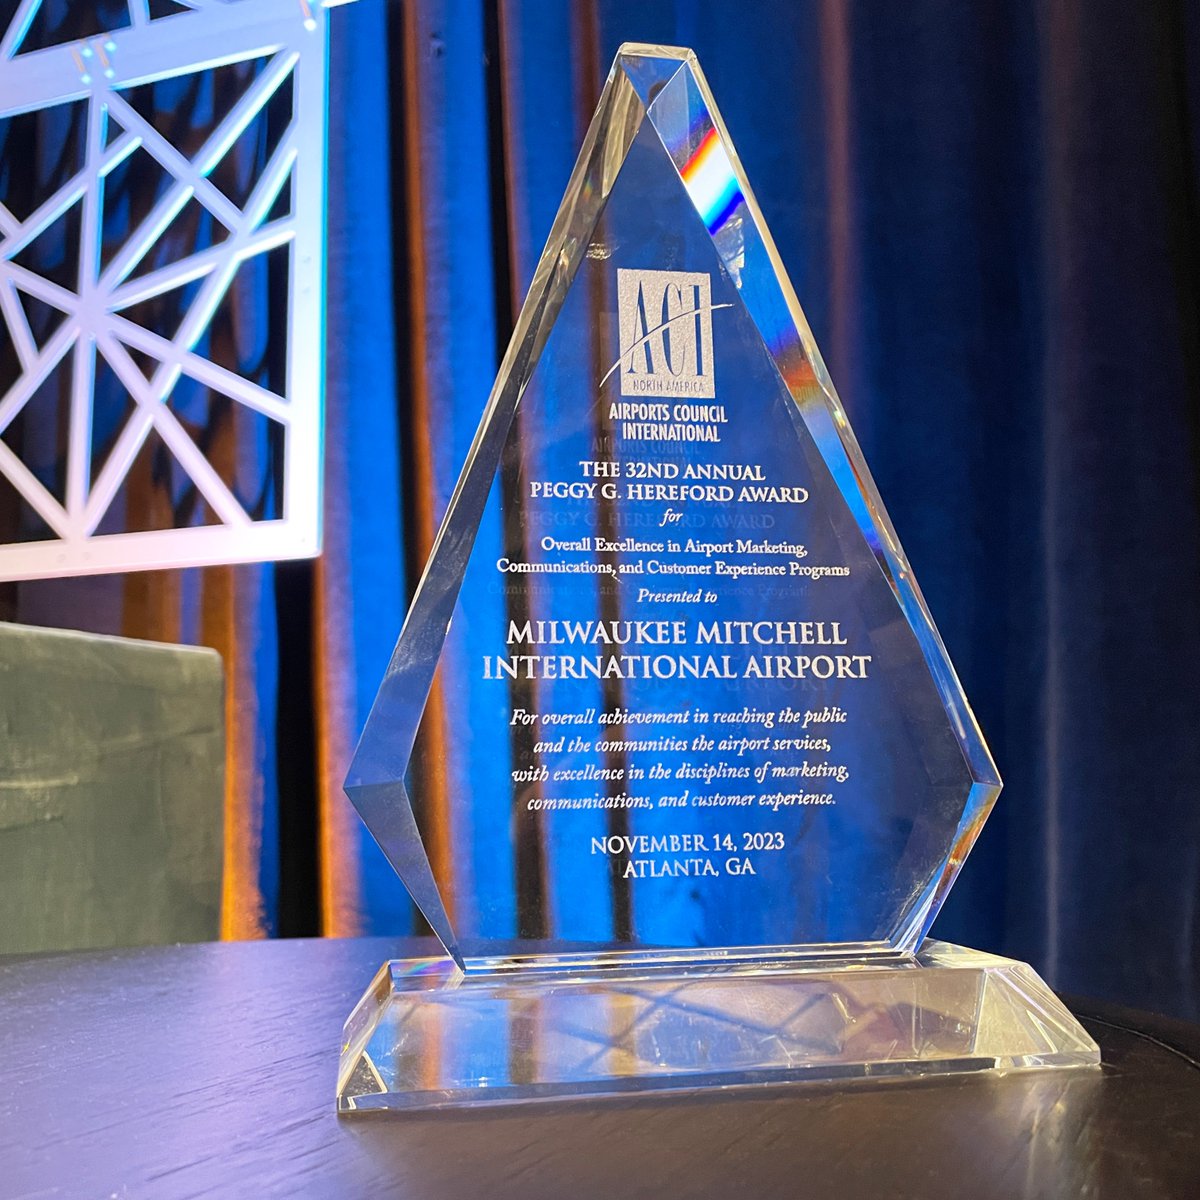 We're honored to receive the Peggy G. Hereford Award from @airportscouncil at the 2023 Excellence in Airport Marketing, Communications, and Customer Experience Awards. This award is widely recognized as the highest honor an airport can receive in marketing and public relations.…